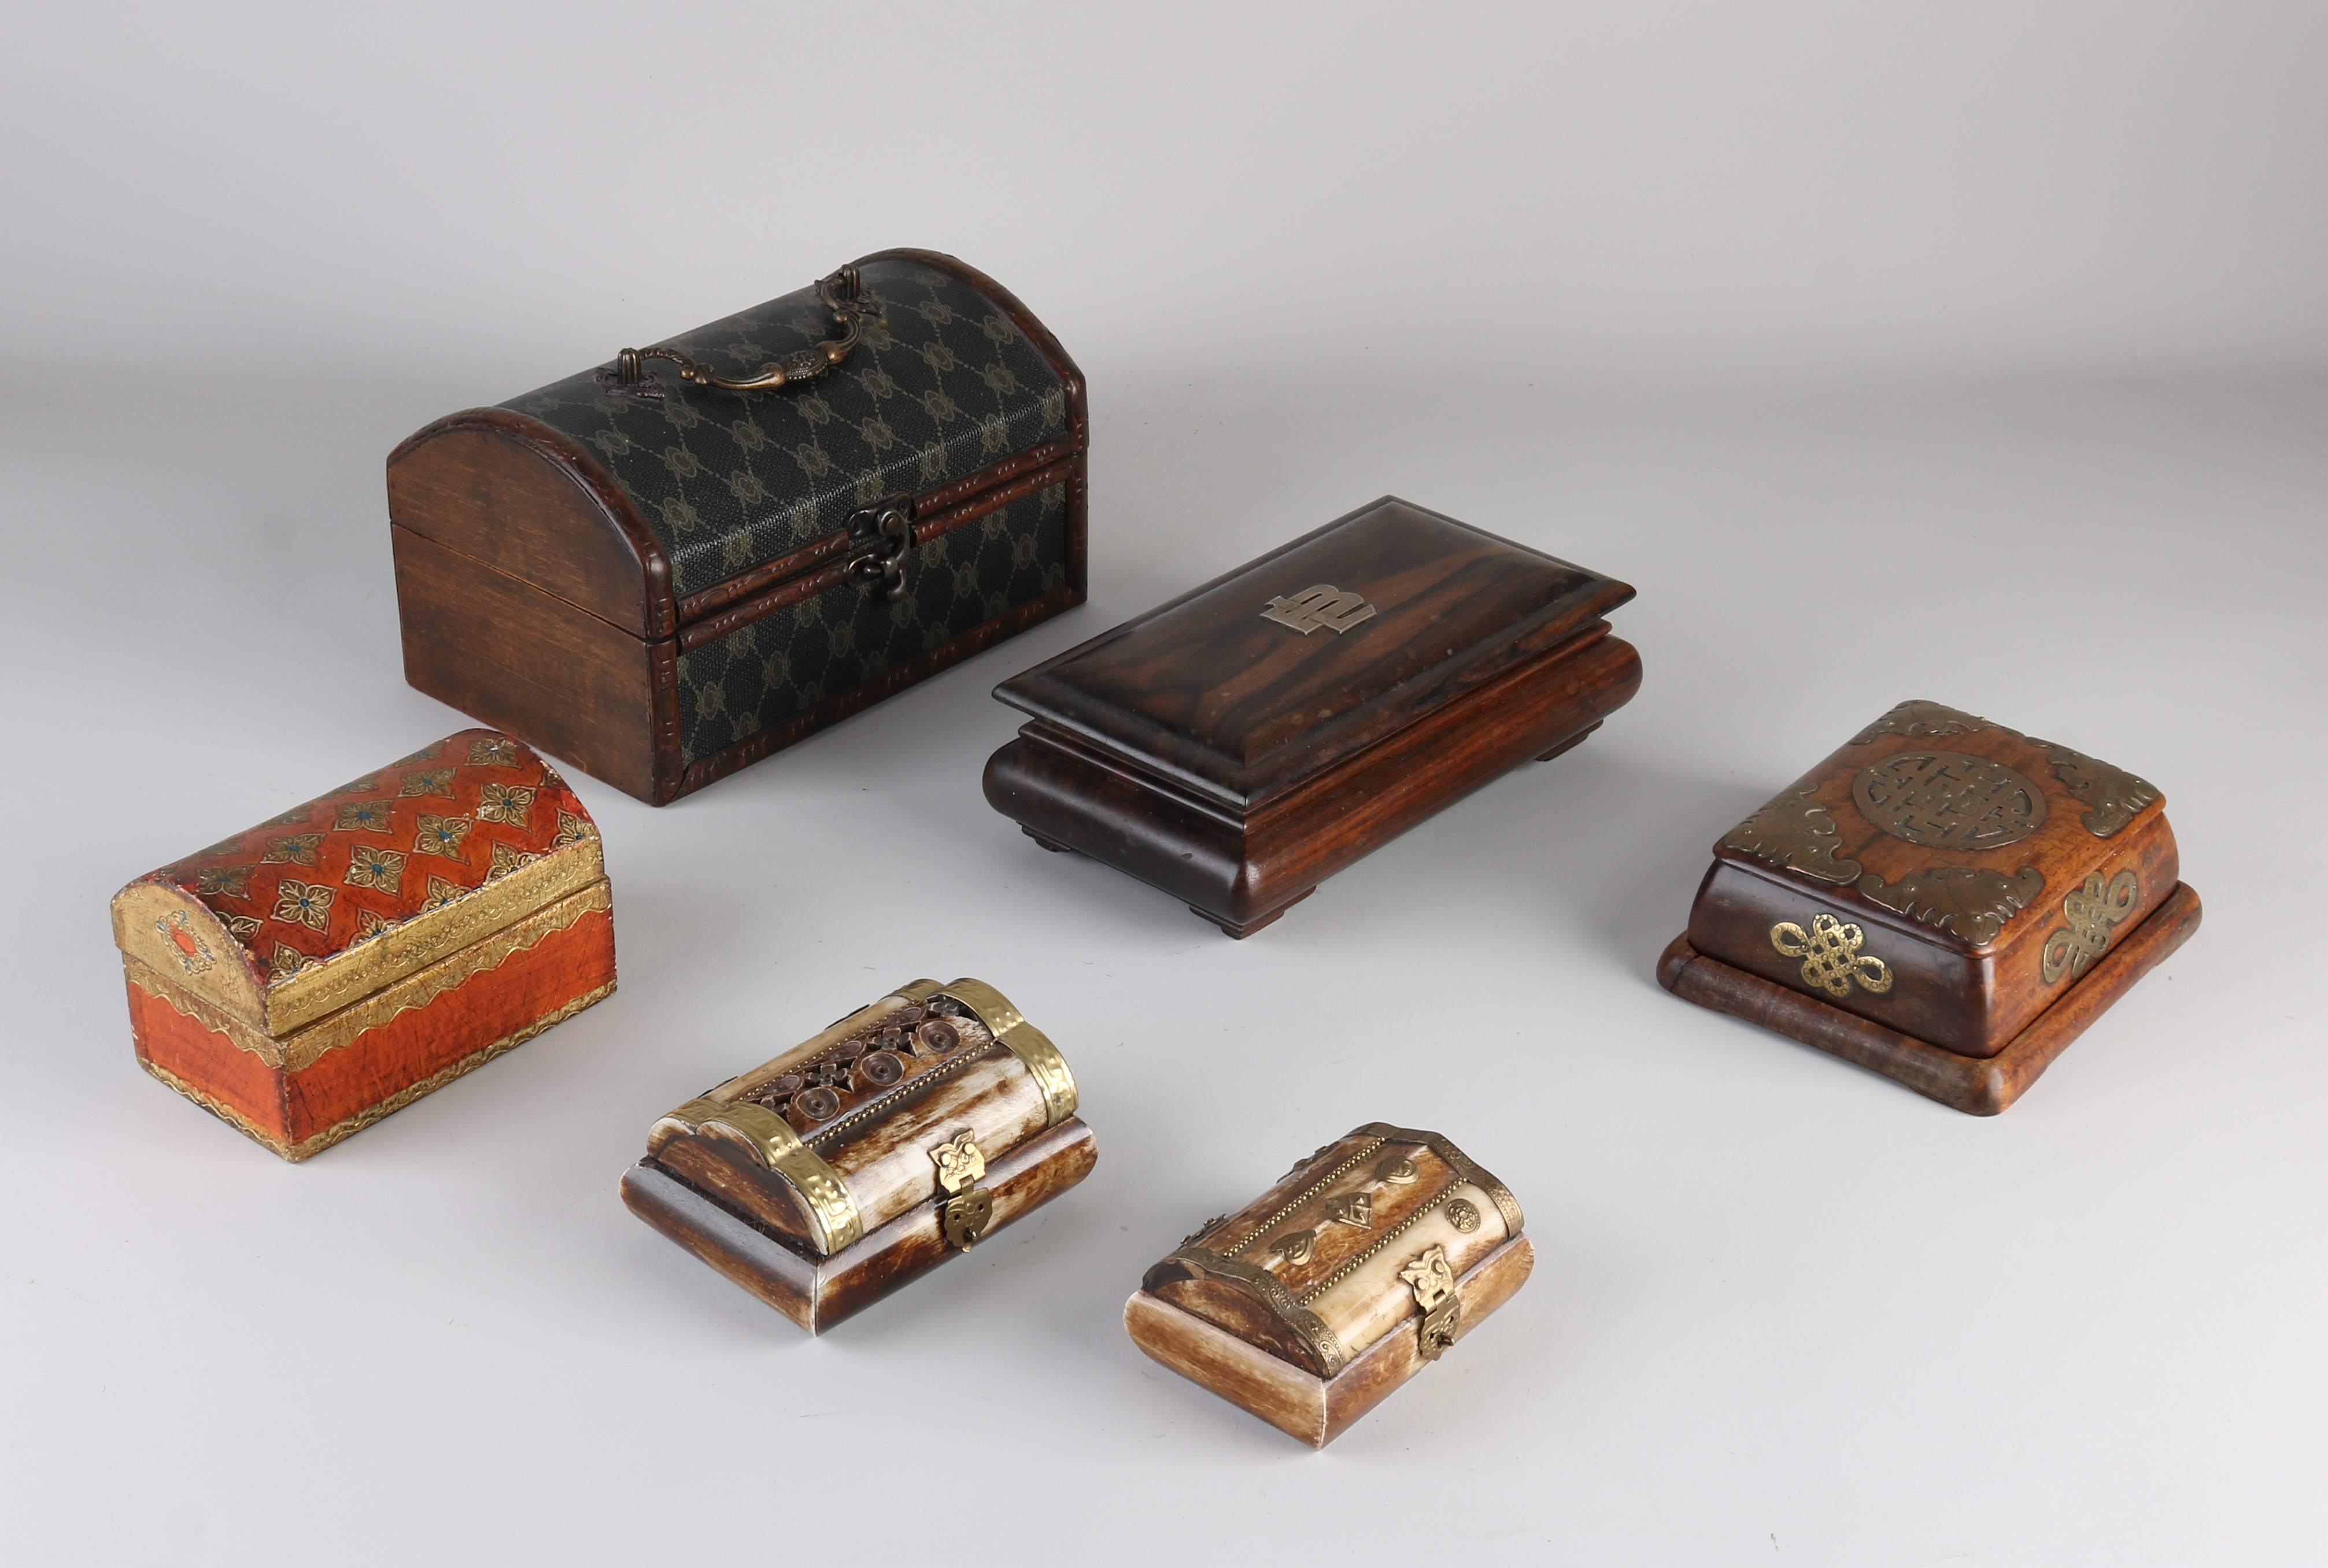 6x Old lidded boxes